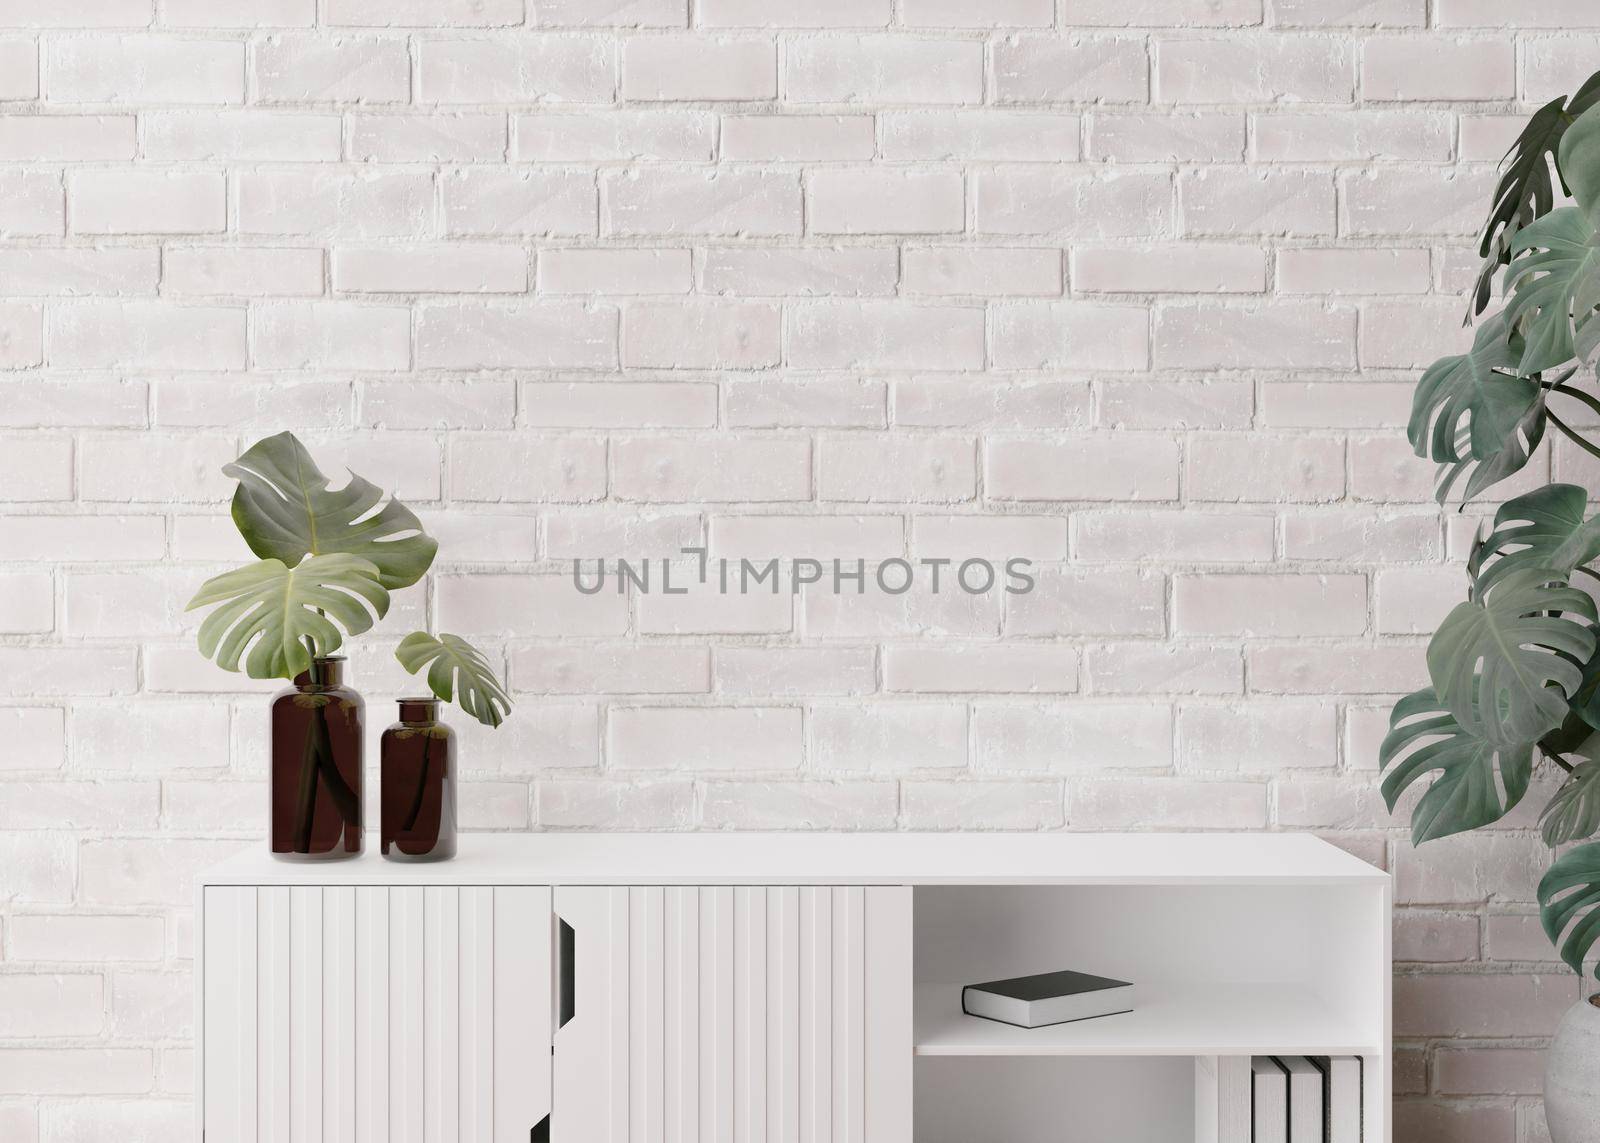 Empty, white brick wall. Mock up interior in contemporary style. Close up view. Free, copy space for your picture, text, or another design. Sideboard, monstera plants. 3D rendering